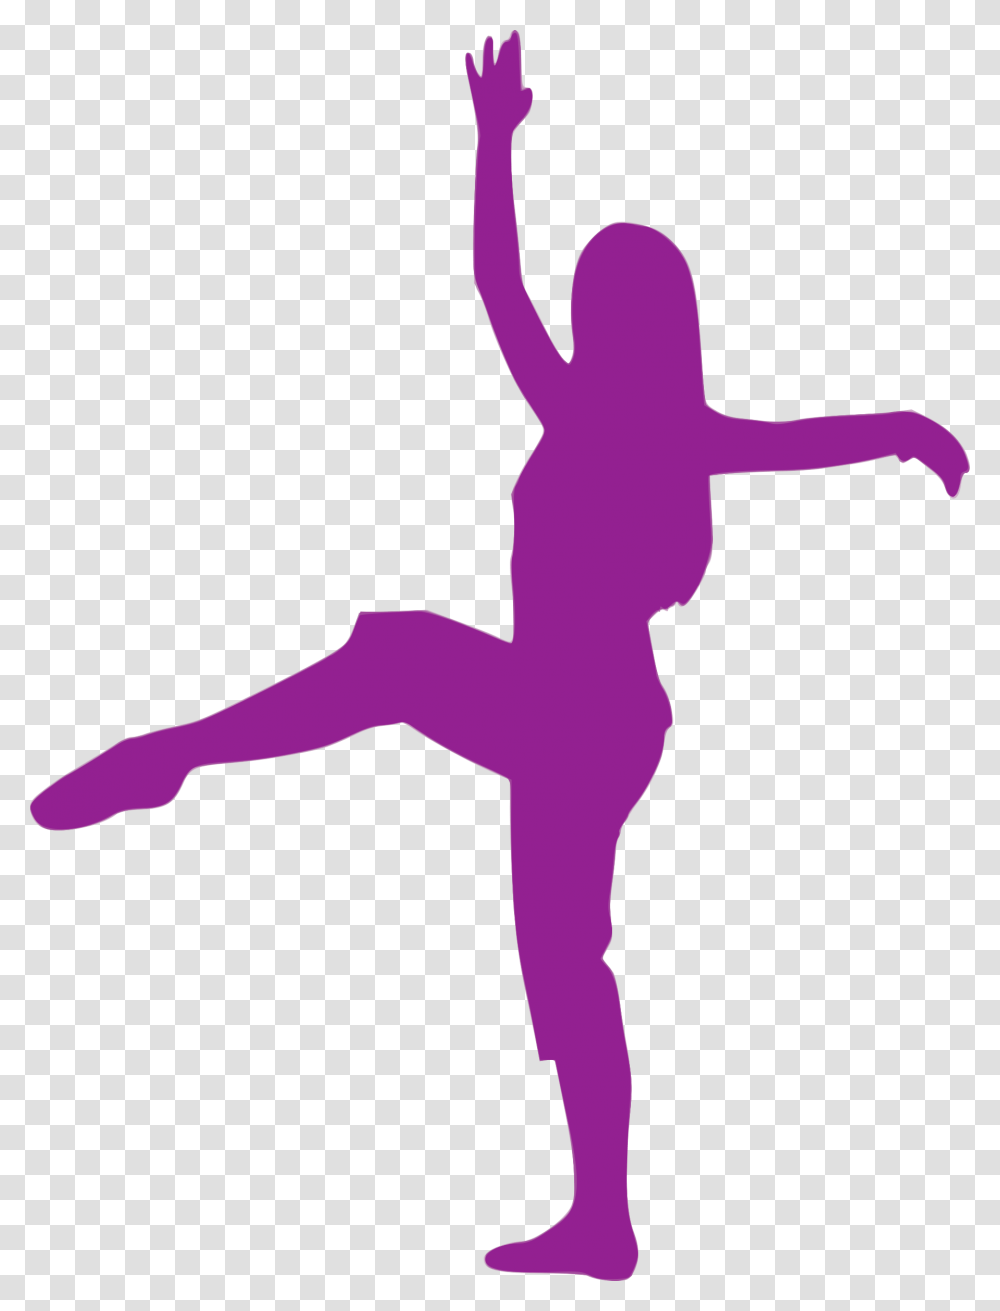 Silhouette Ballet Dancer Performing Arts Clip Art Silhouettes Of Dancing Colored, Person, Human, Ballerina, Outdoors Transparent Png